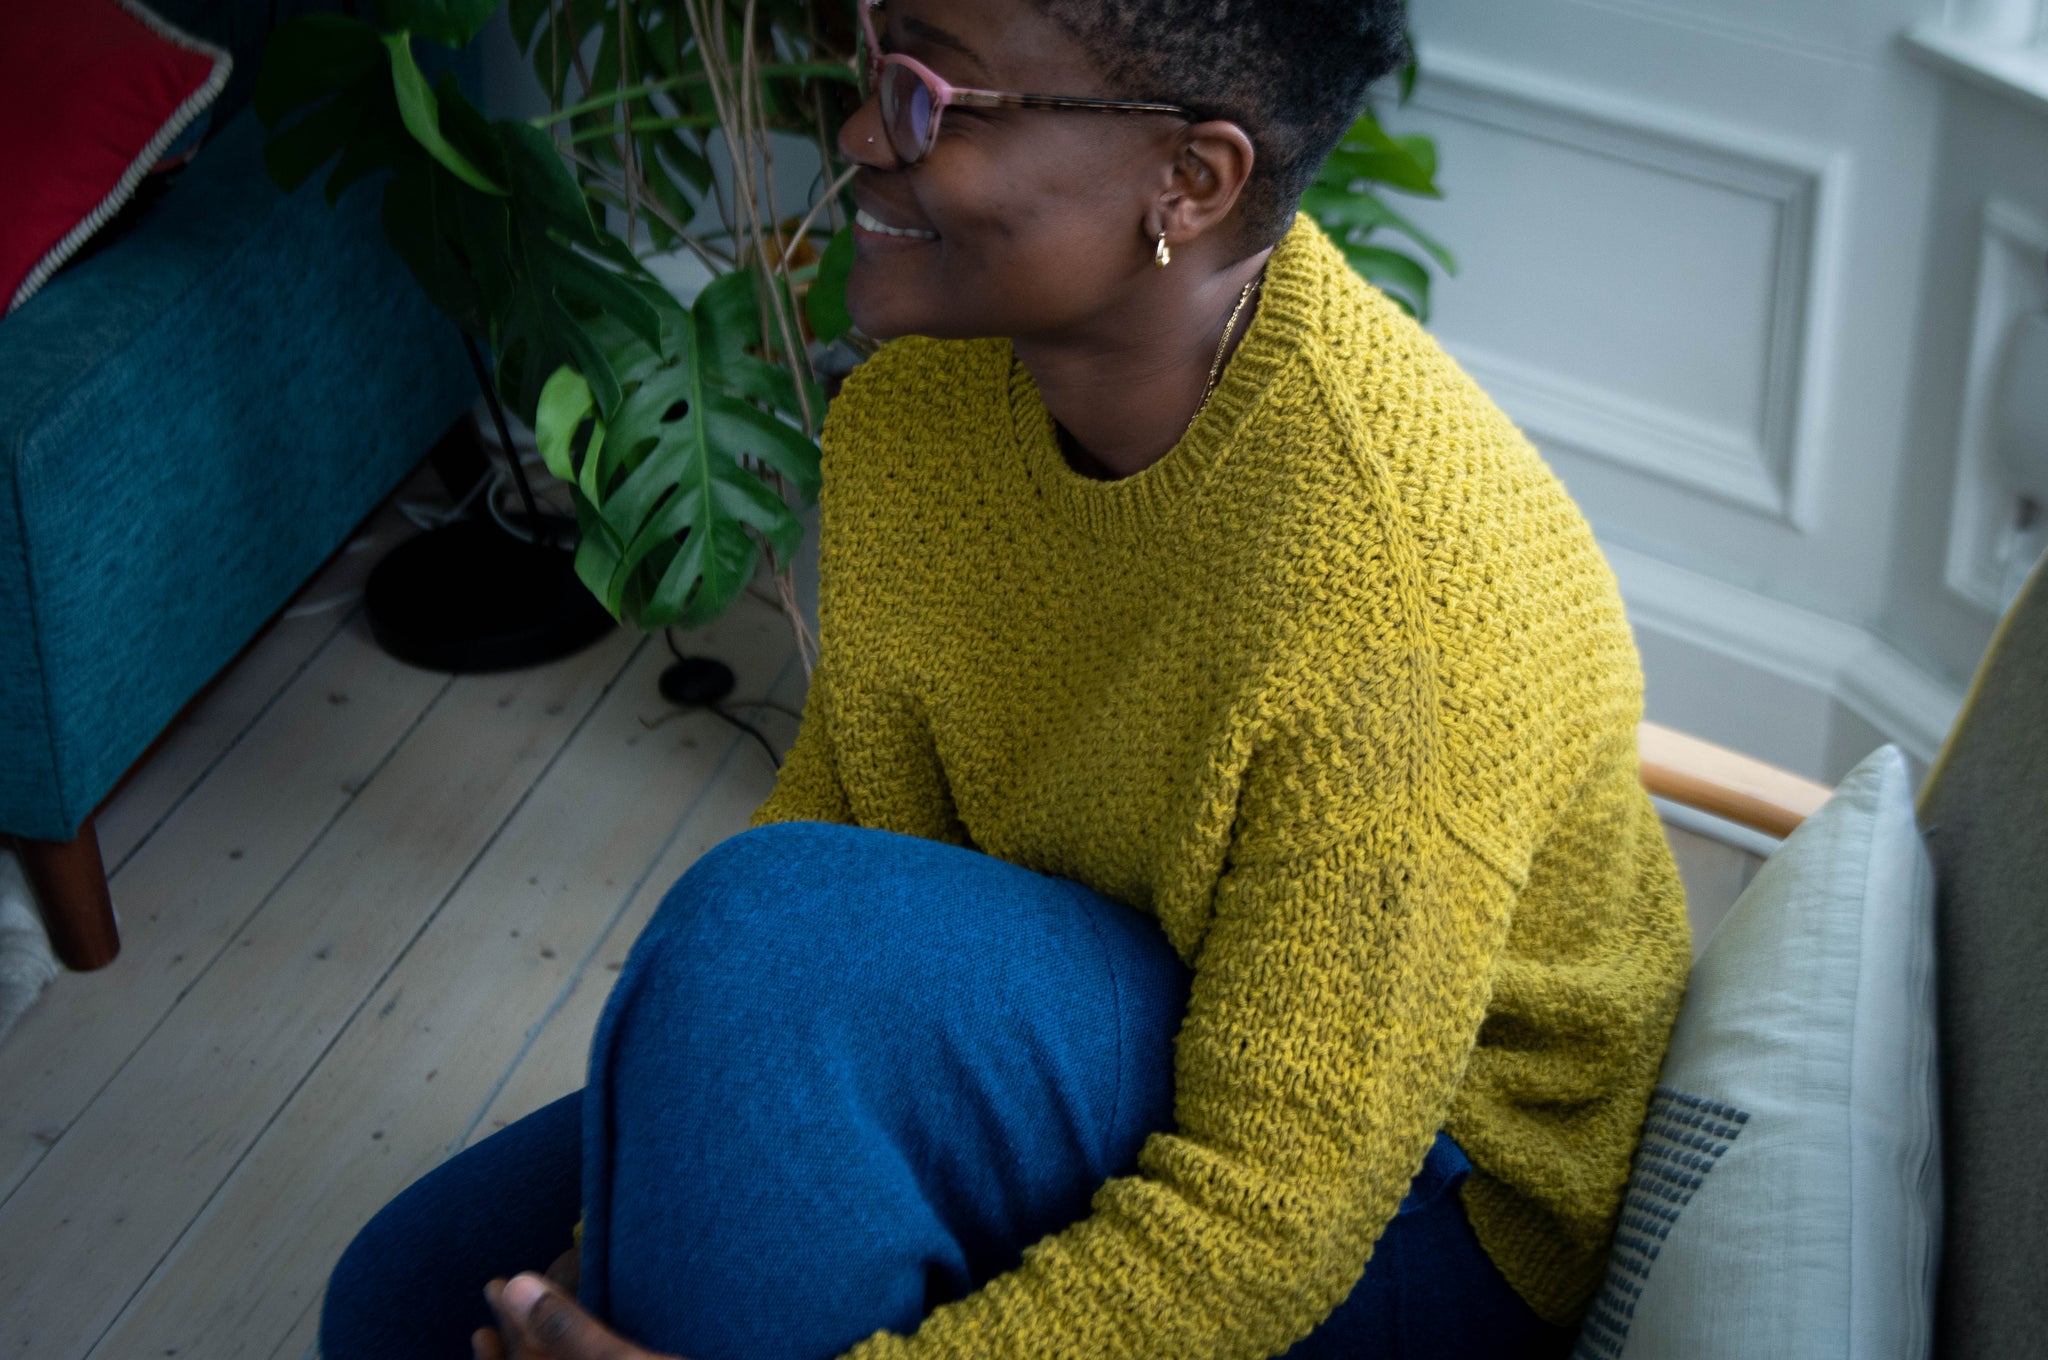 A black woman with short hair sits on a chair indoors with one knee held to her chest. She wears a yellow sweater with blue trousers and smiles while looking to the left of the image